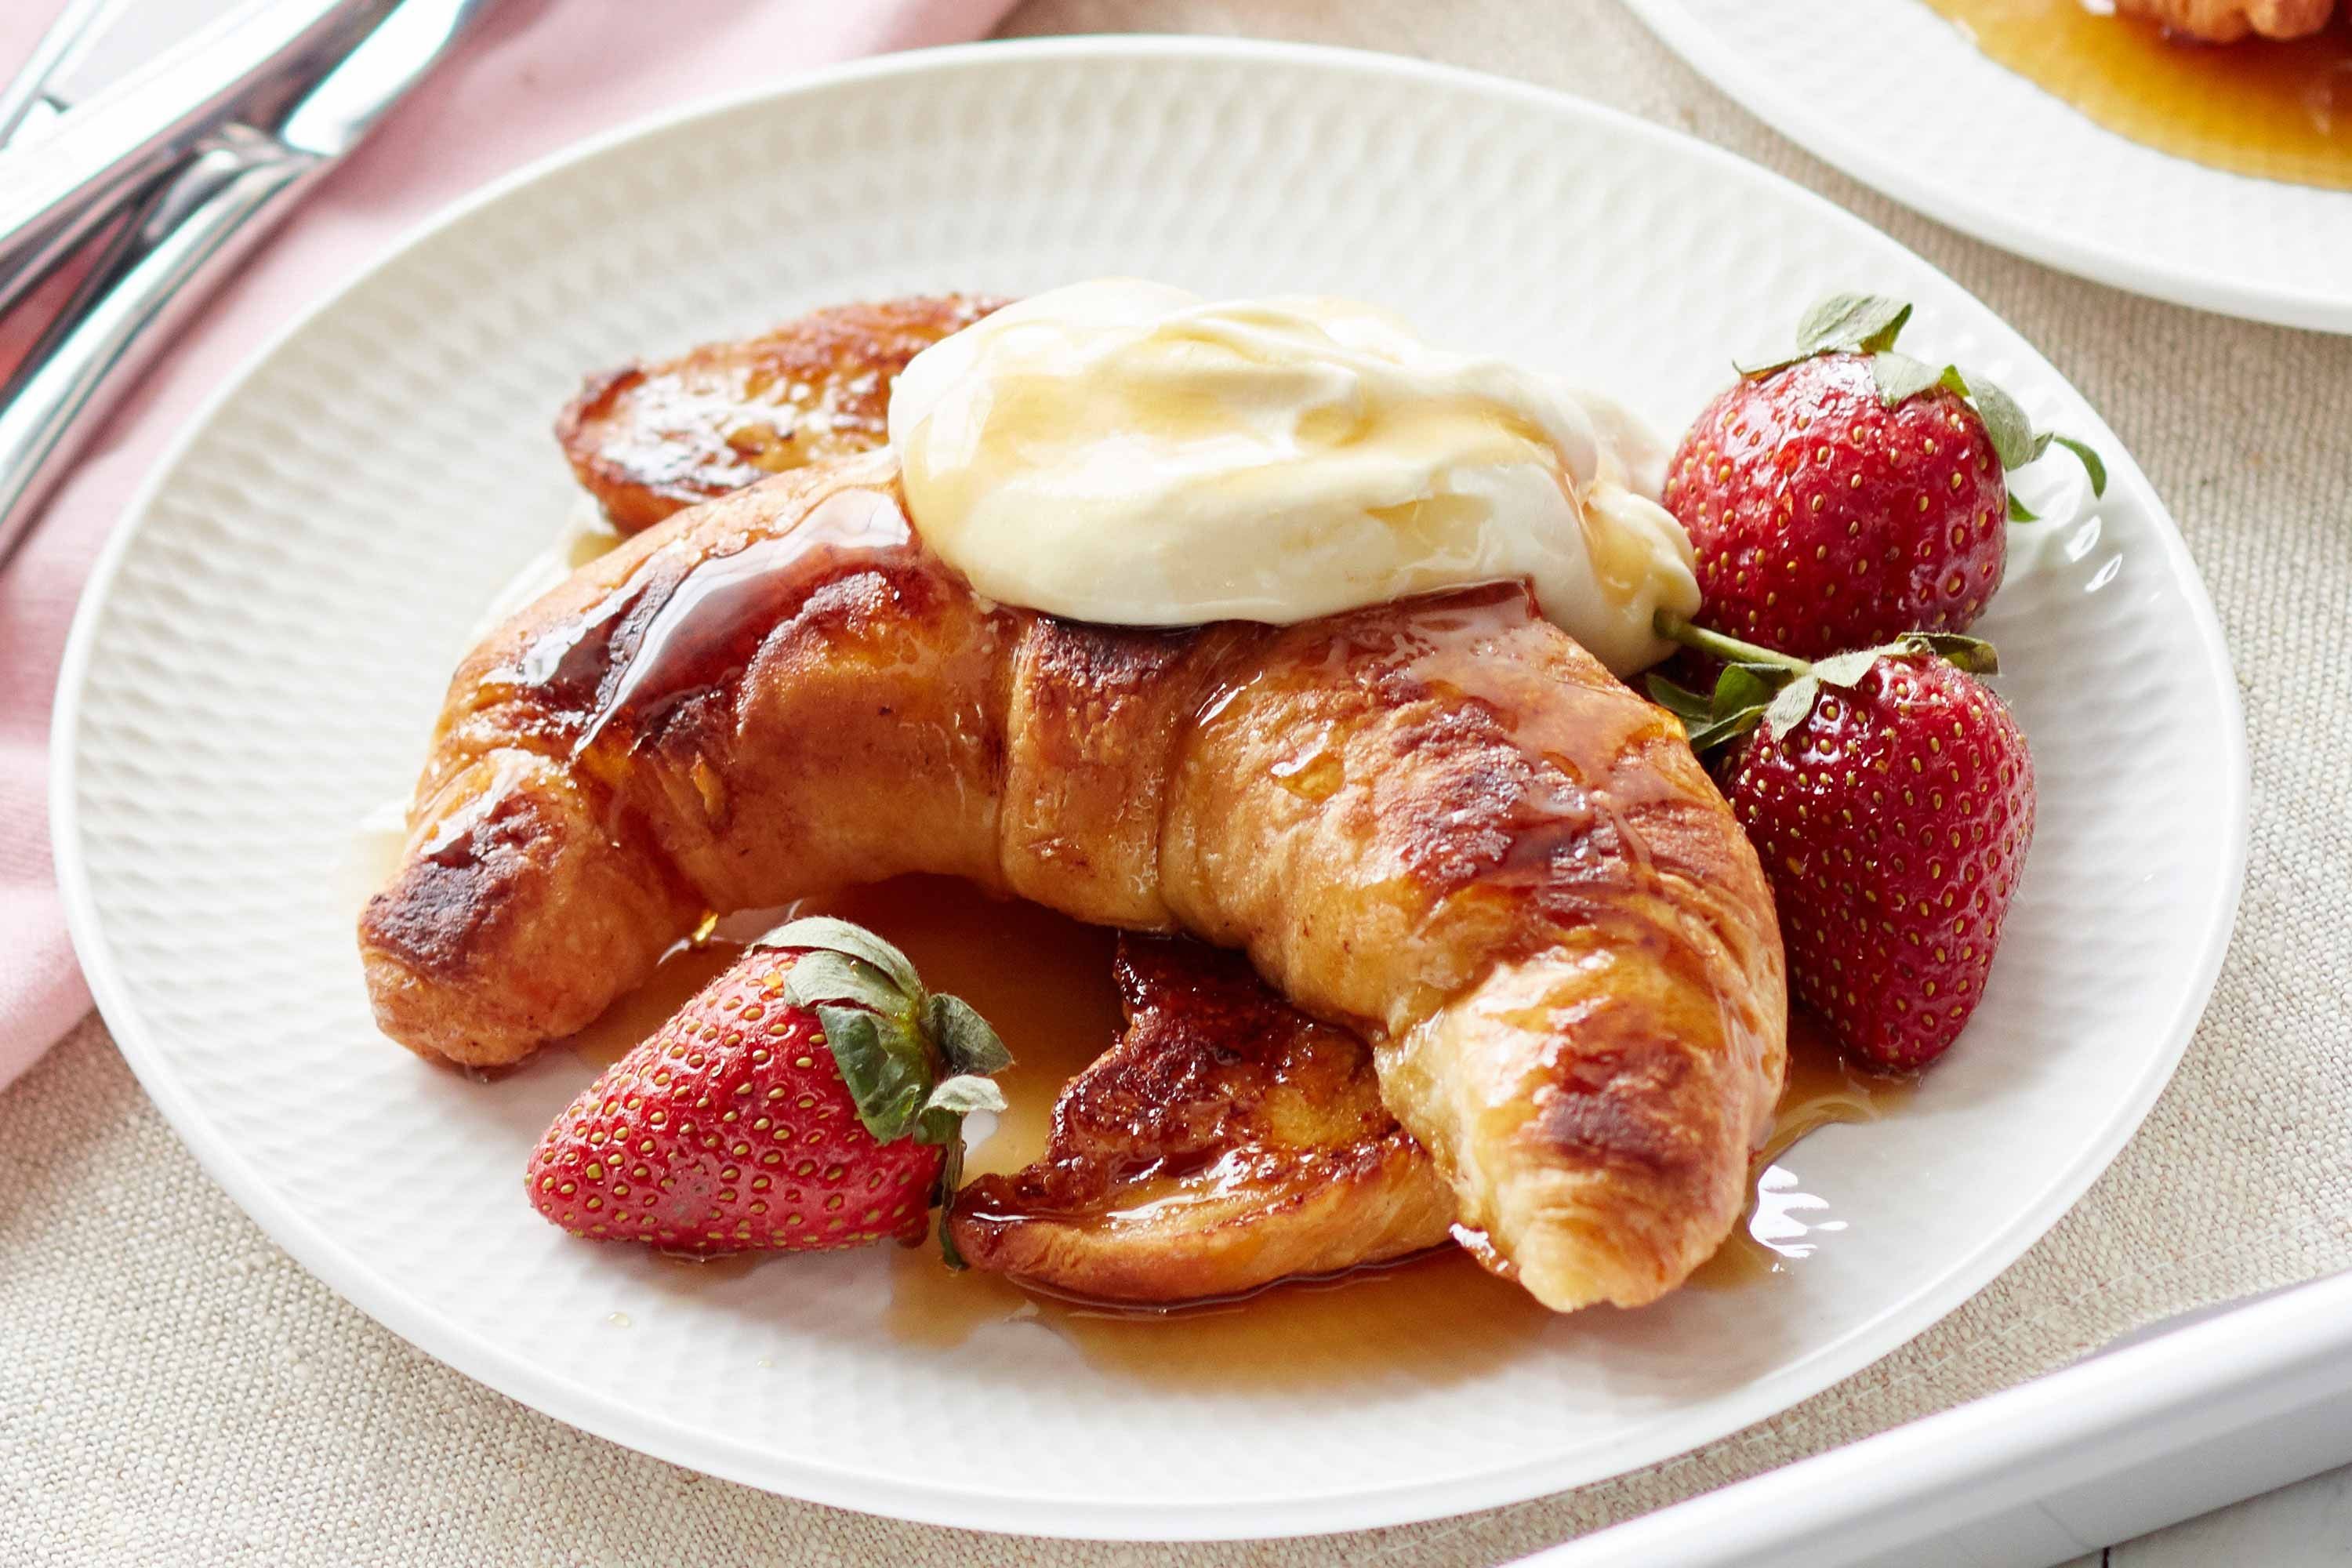 Can We Guess Your Zodiac Sign Based on Your Taste in Food? croissant french toast with strawberries 110787 1